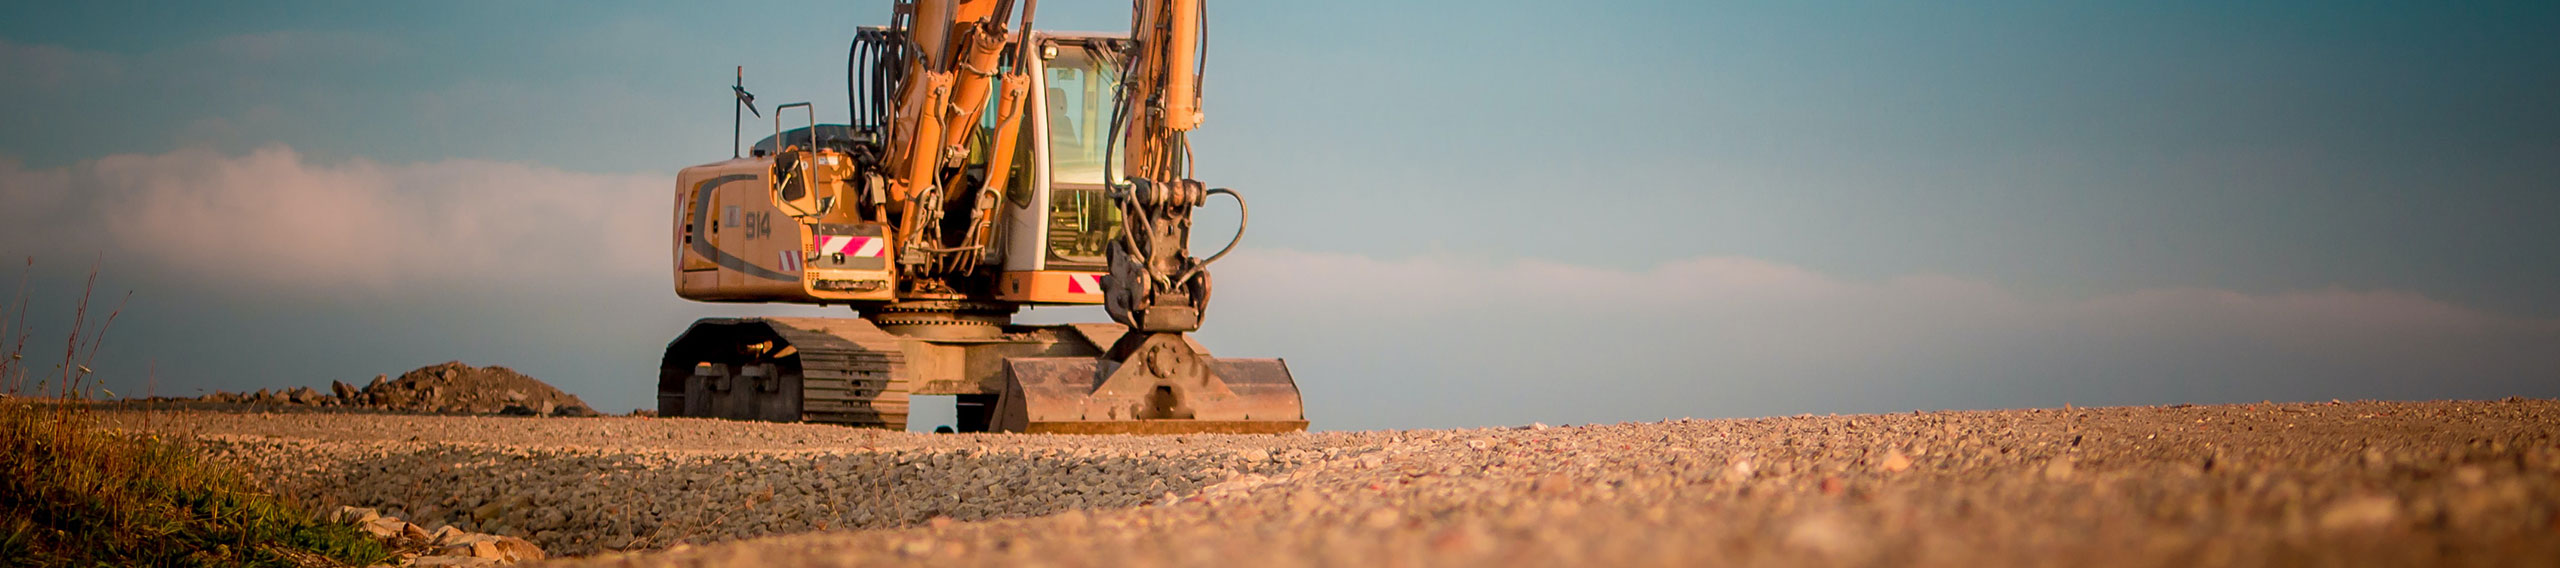 Excavator hire insurance protecting a heavy duty excavator